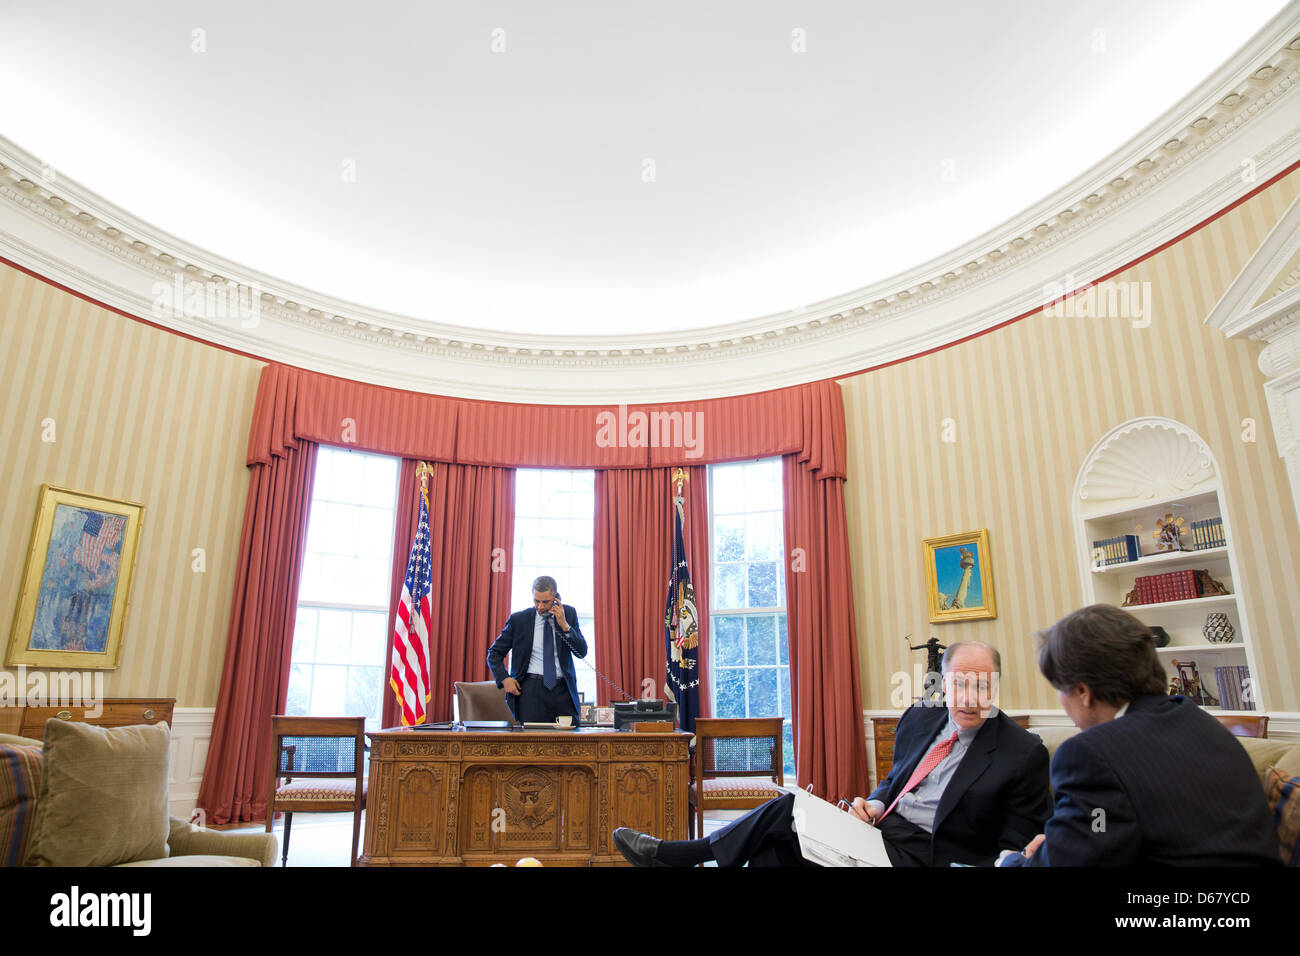 United States President Barack Obama talks on the phone with President Vladimir Putin of Russia in the Oval Office, March 1, 2013. National Security Advisor Tom Donilon speaks with Tony Blinken, Deputy National Security Advisor, right. .Mandatory Credit: Pete Souza - White House via CNP Stock Photo